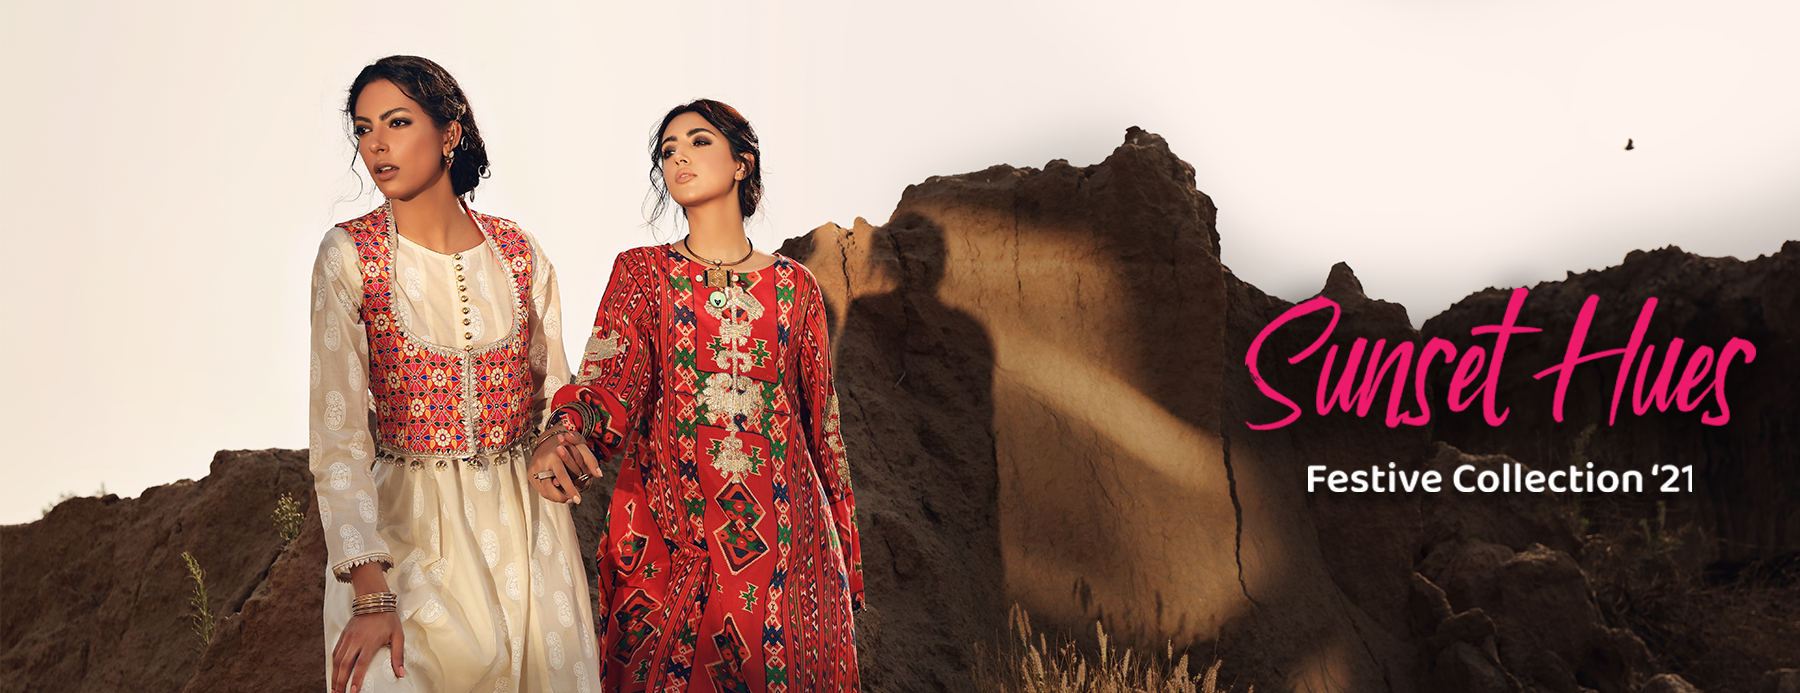 Sunset Hues - Eid Collection'21